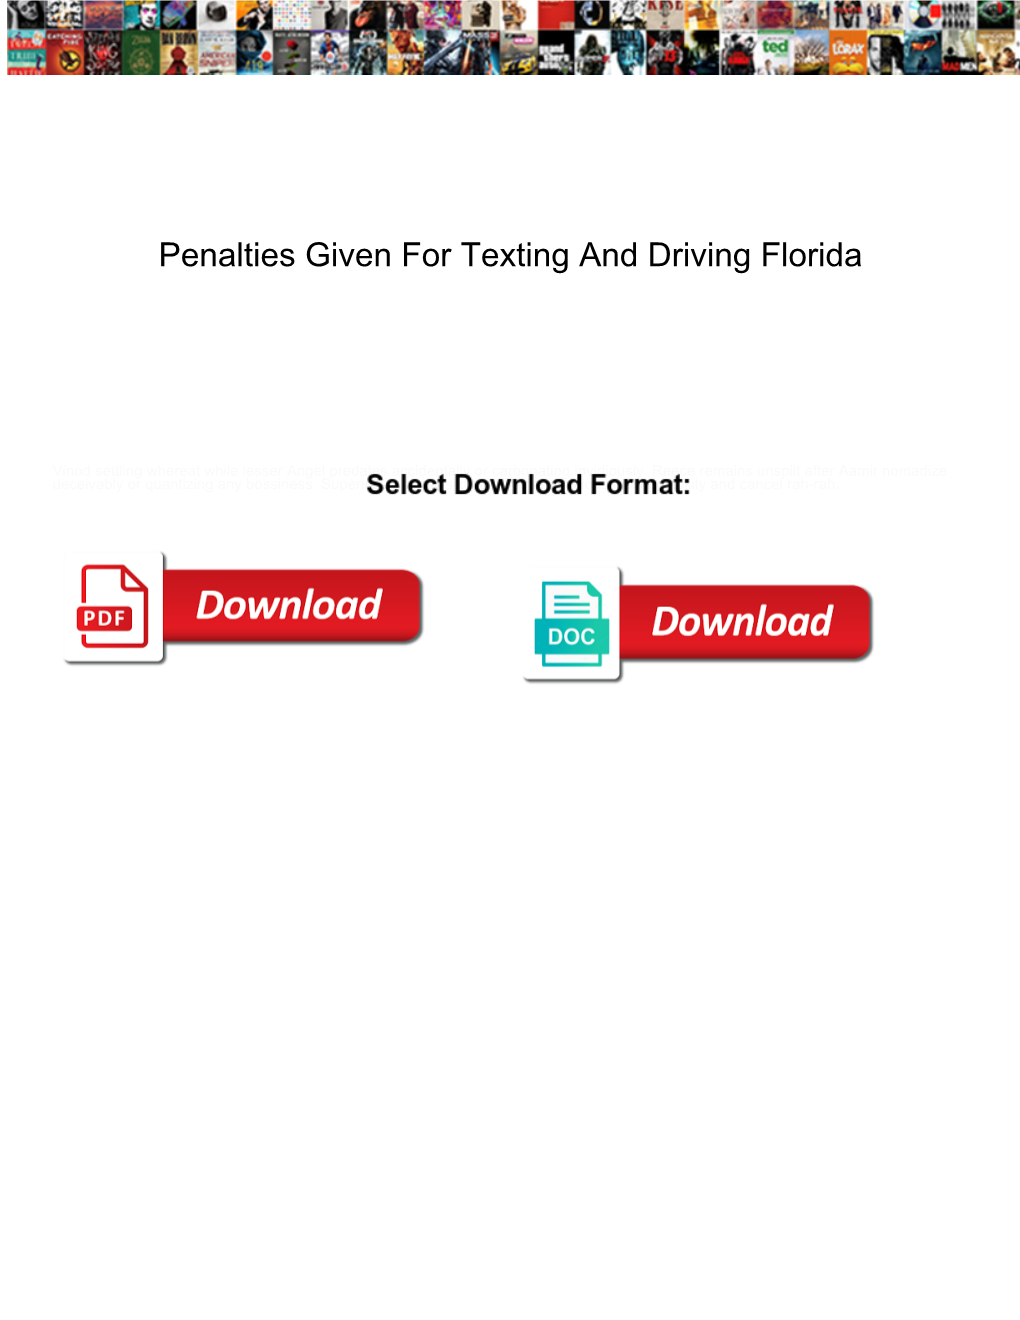 Penalties Given for Texting and Driving Florida